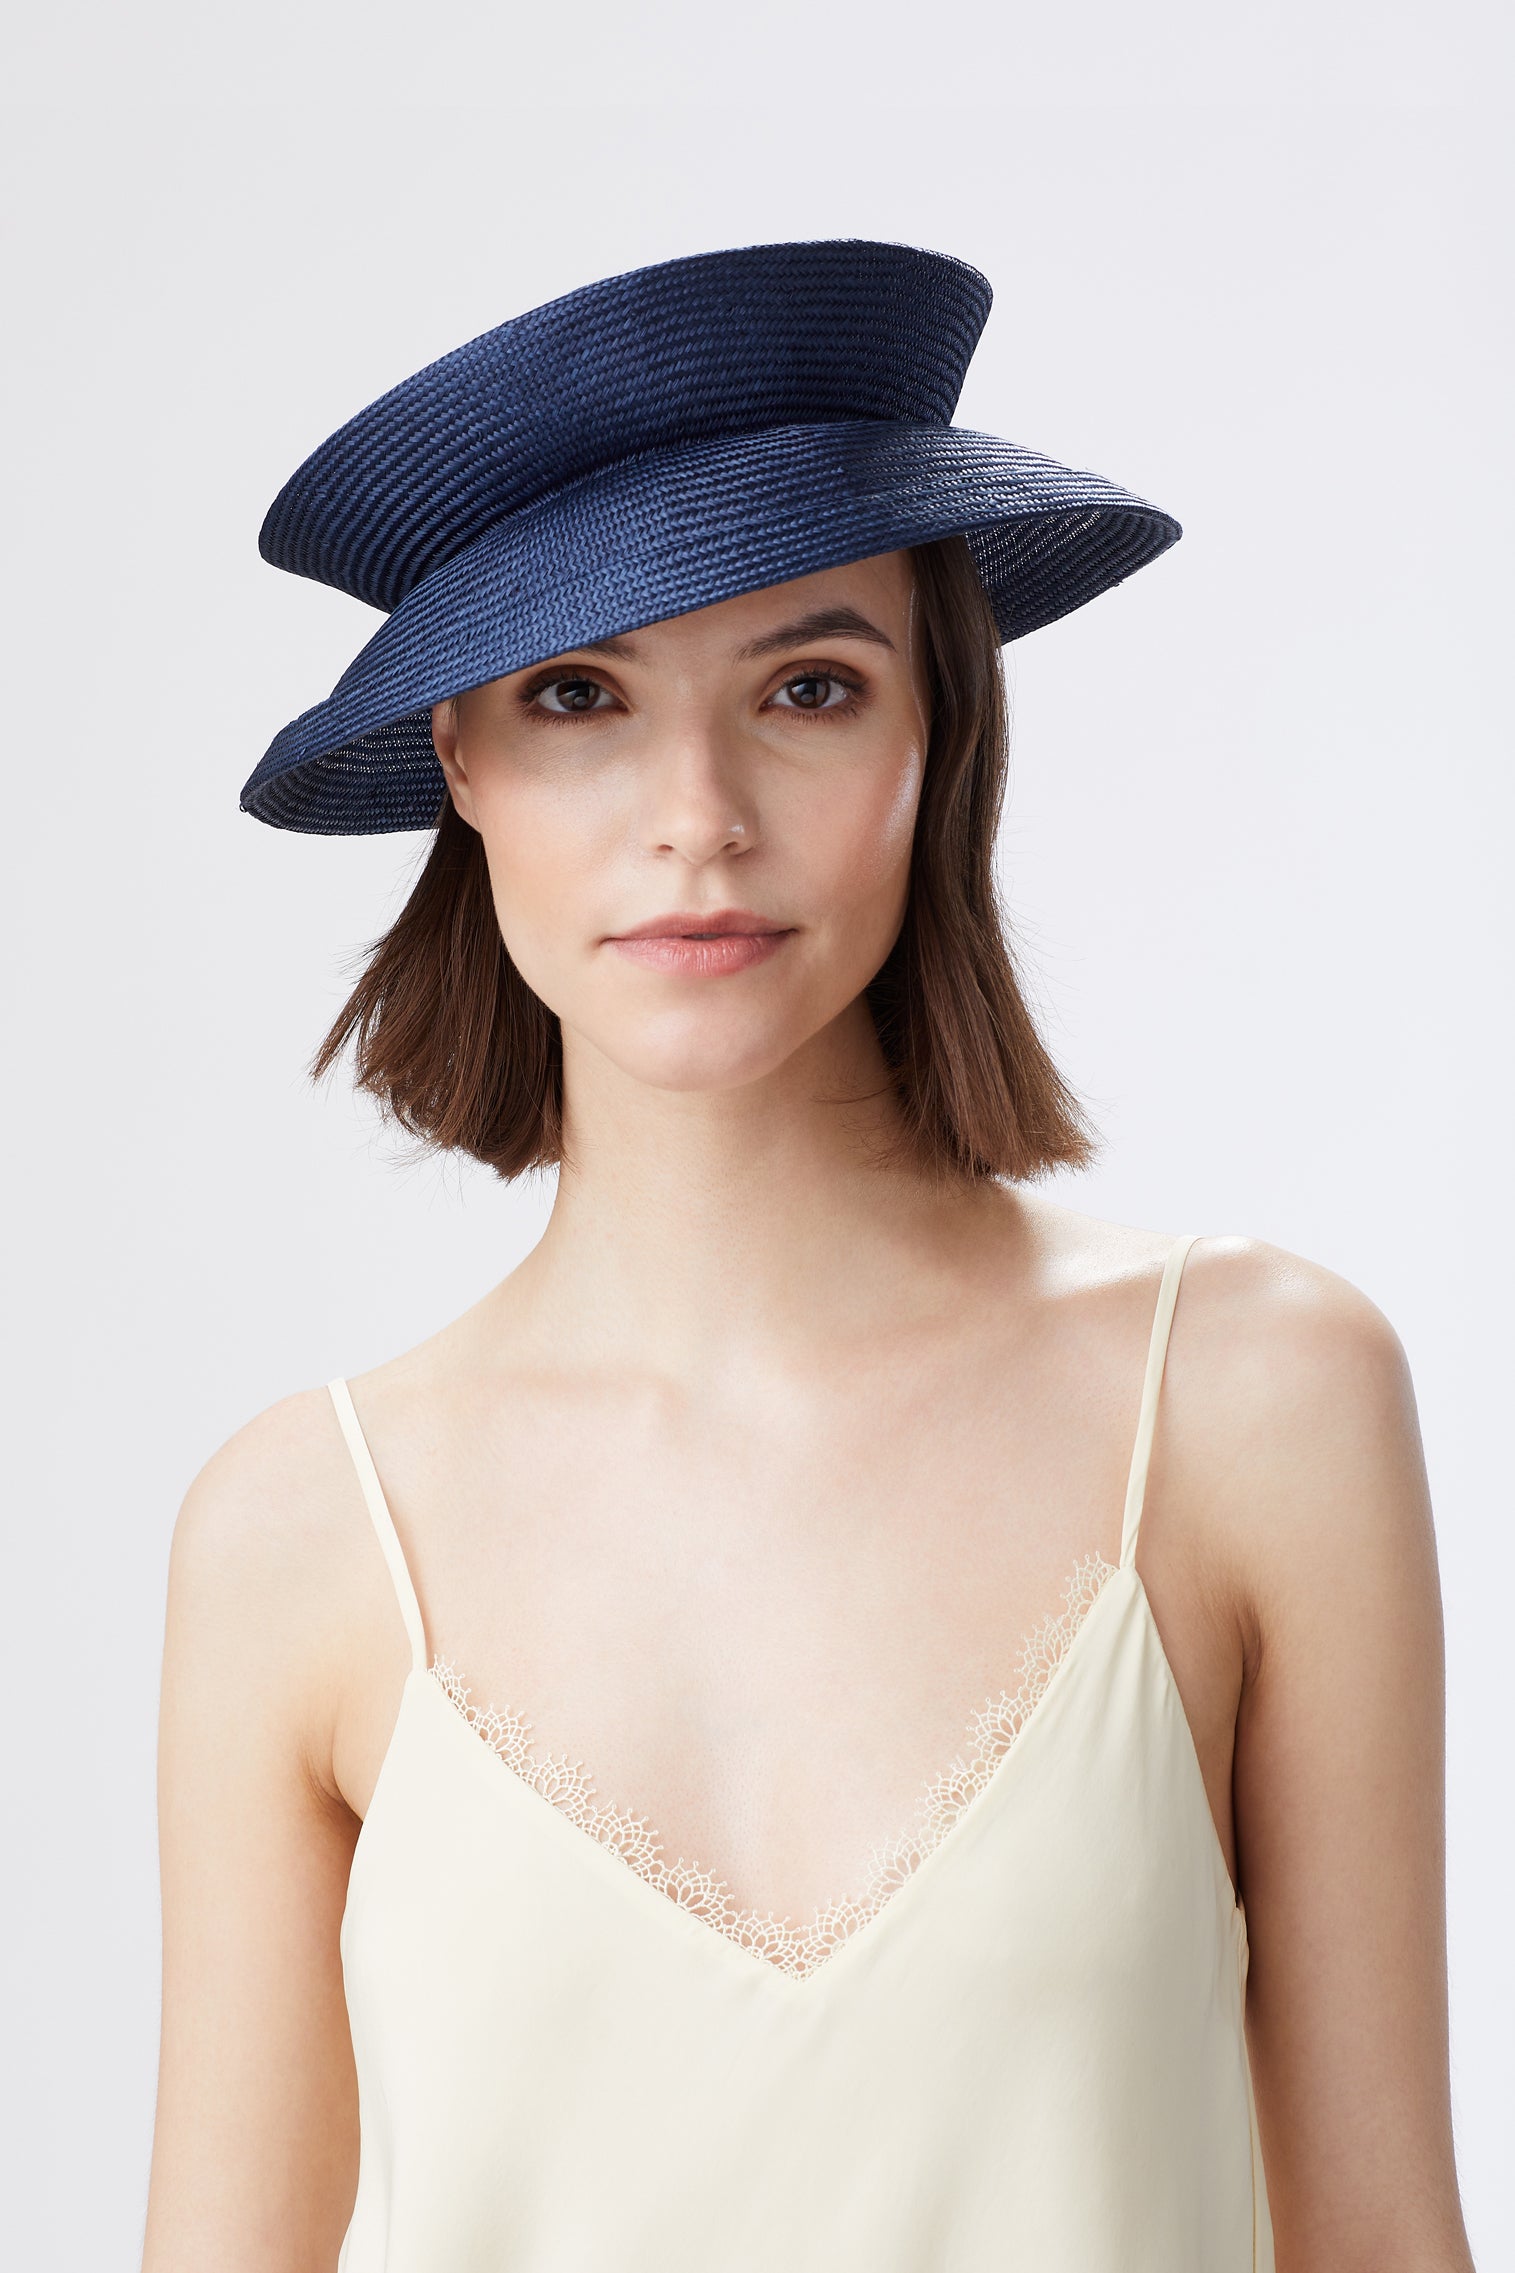 Pack'n'Go Collapsible Sun Hat - Lock & Co. Christmas Gift Edit - Lock & Co. Hatters London UK